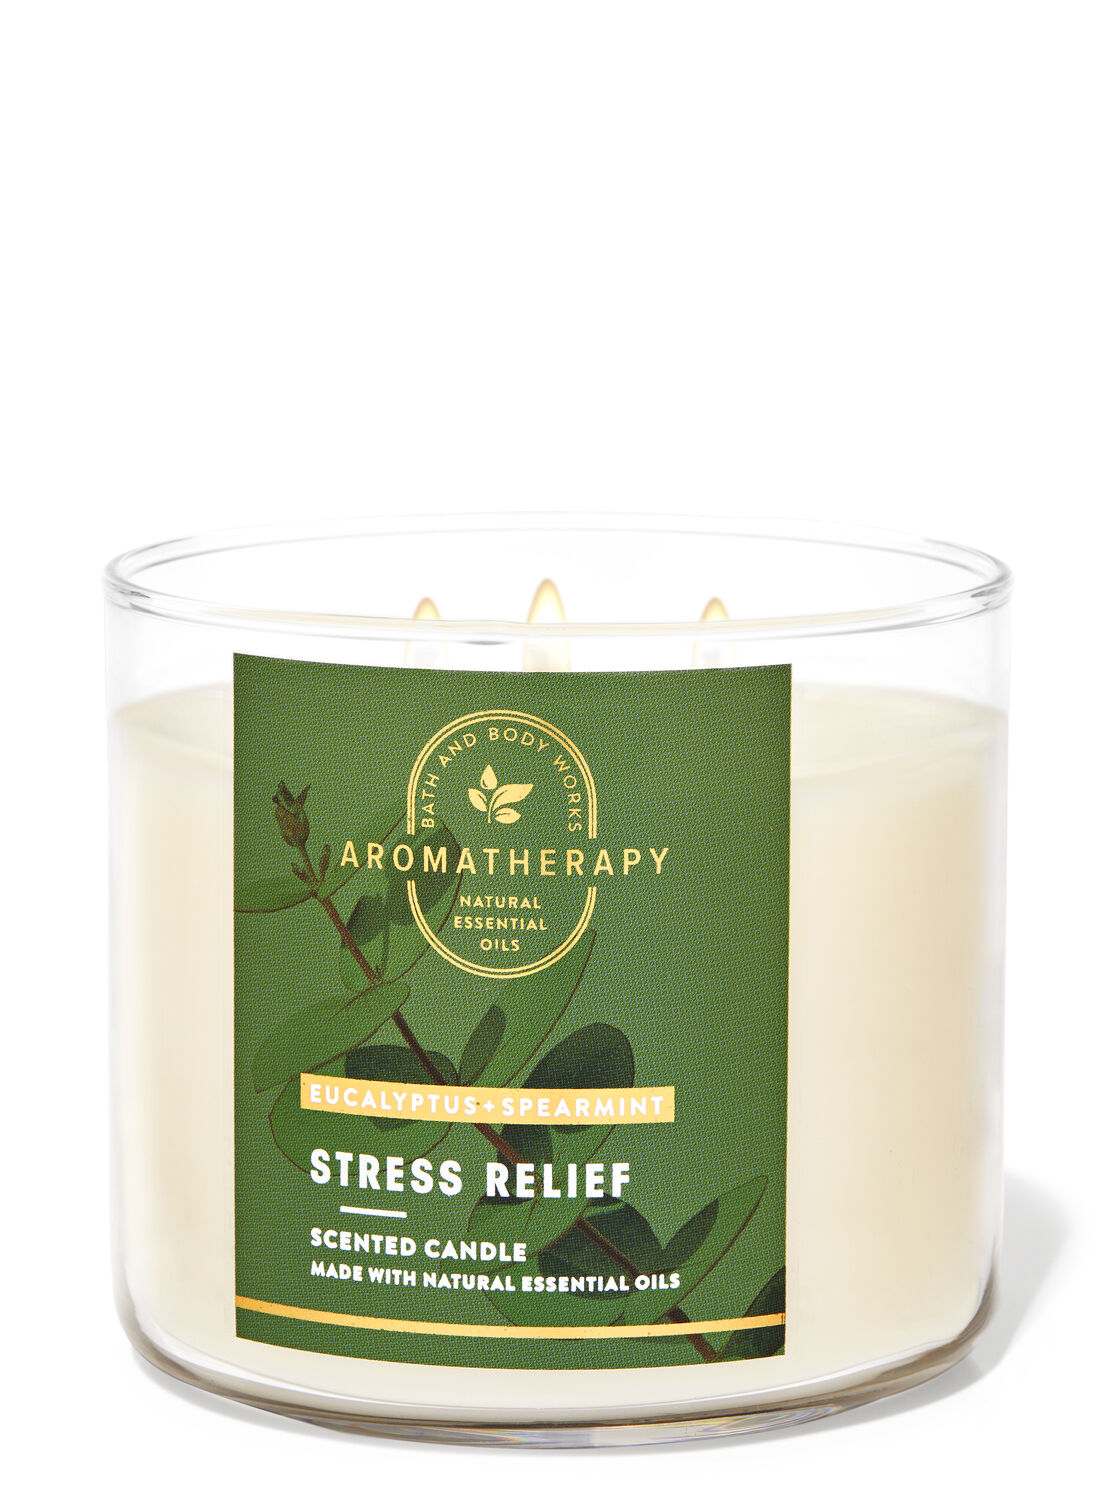 BATH & BODY WORKS AROMATHERAPY COMFORT  SCENTED 3 WICK CANDLE 14.5oz NEW! 